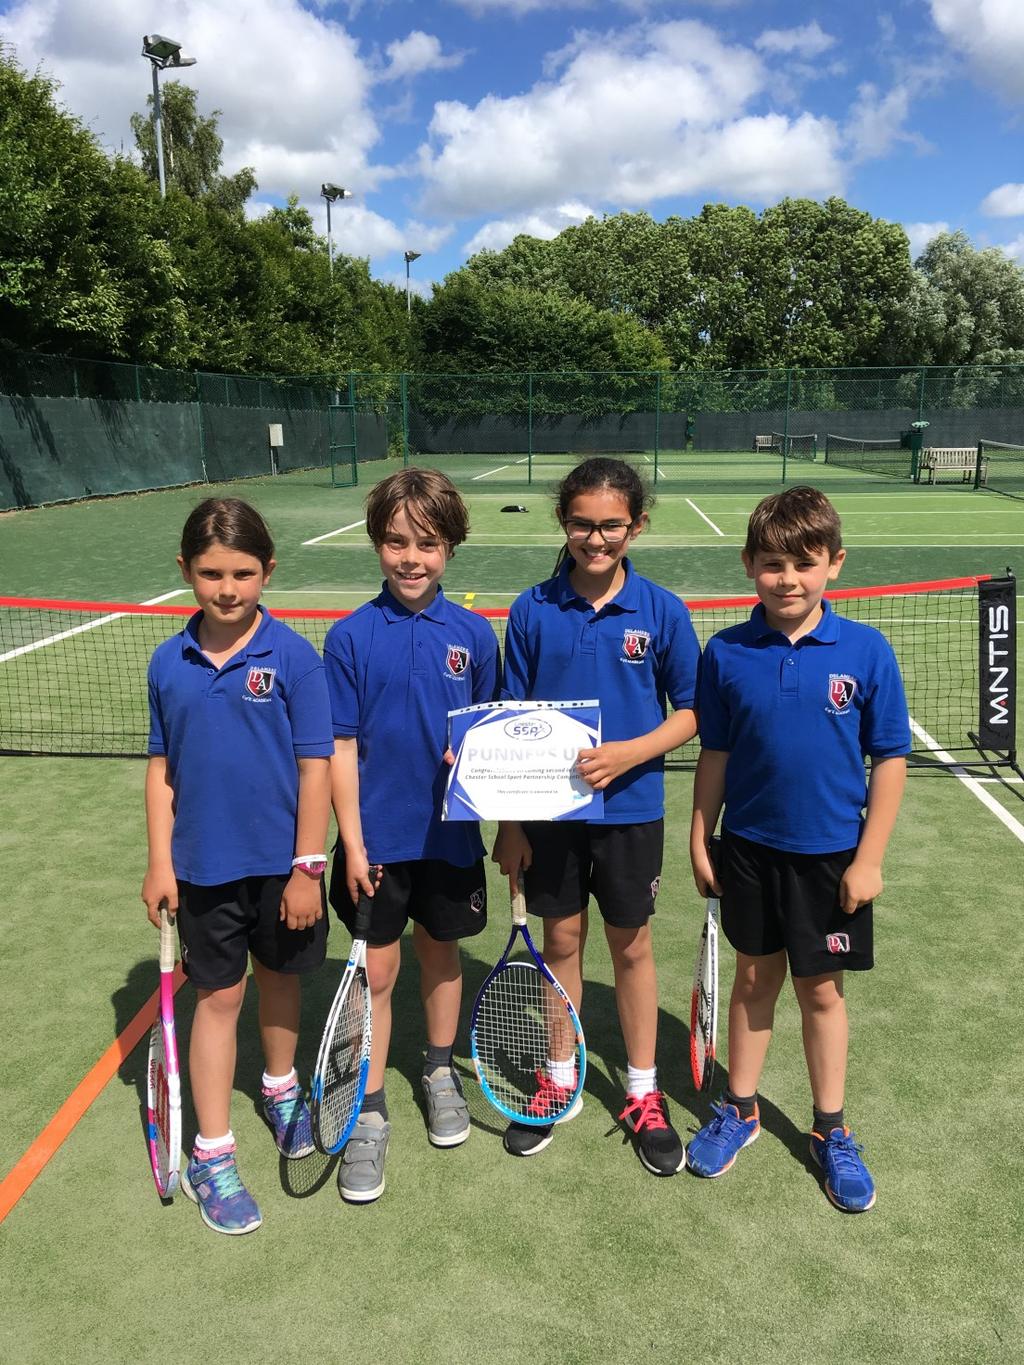 Year 3&4 Mini Red Tennis Competition & Inclusive Competition On Thursday 21st June, Glan Aber Tennis Club hosted the Year 3&4 Mini Red Tennis Competition